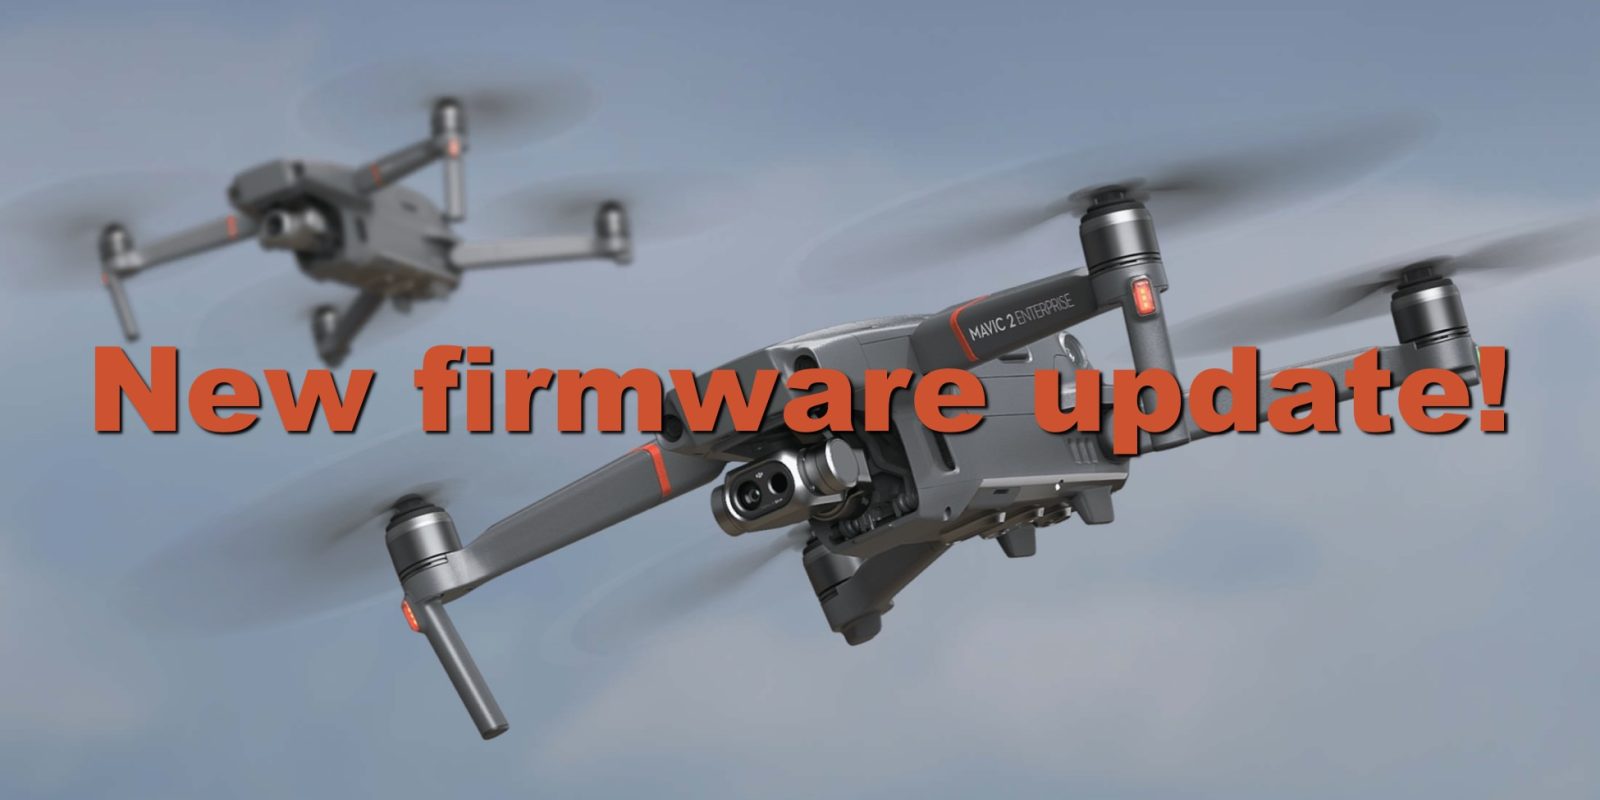 DJI announces upgraded support program for enterprise customers in North America